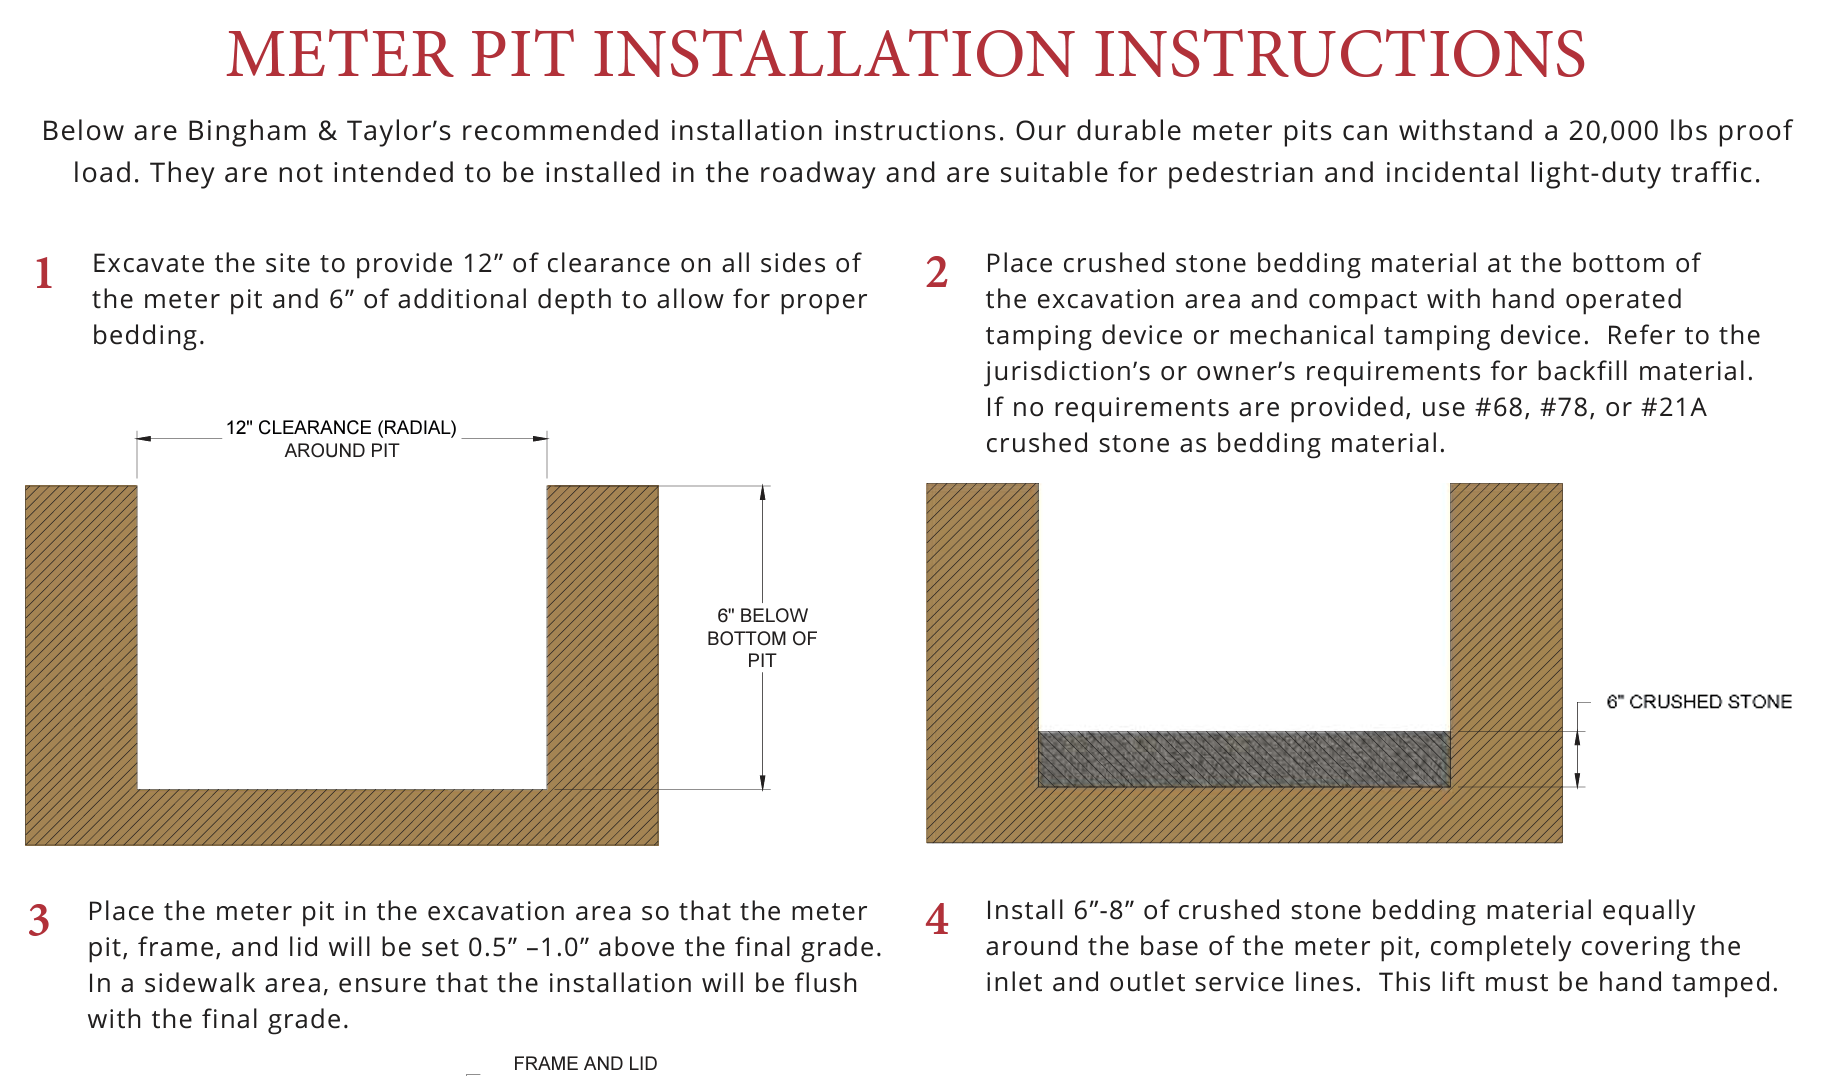 Guide - Meter Pit Installation